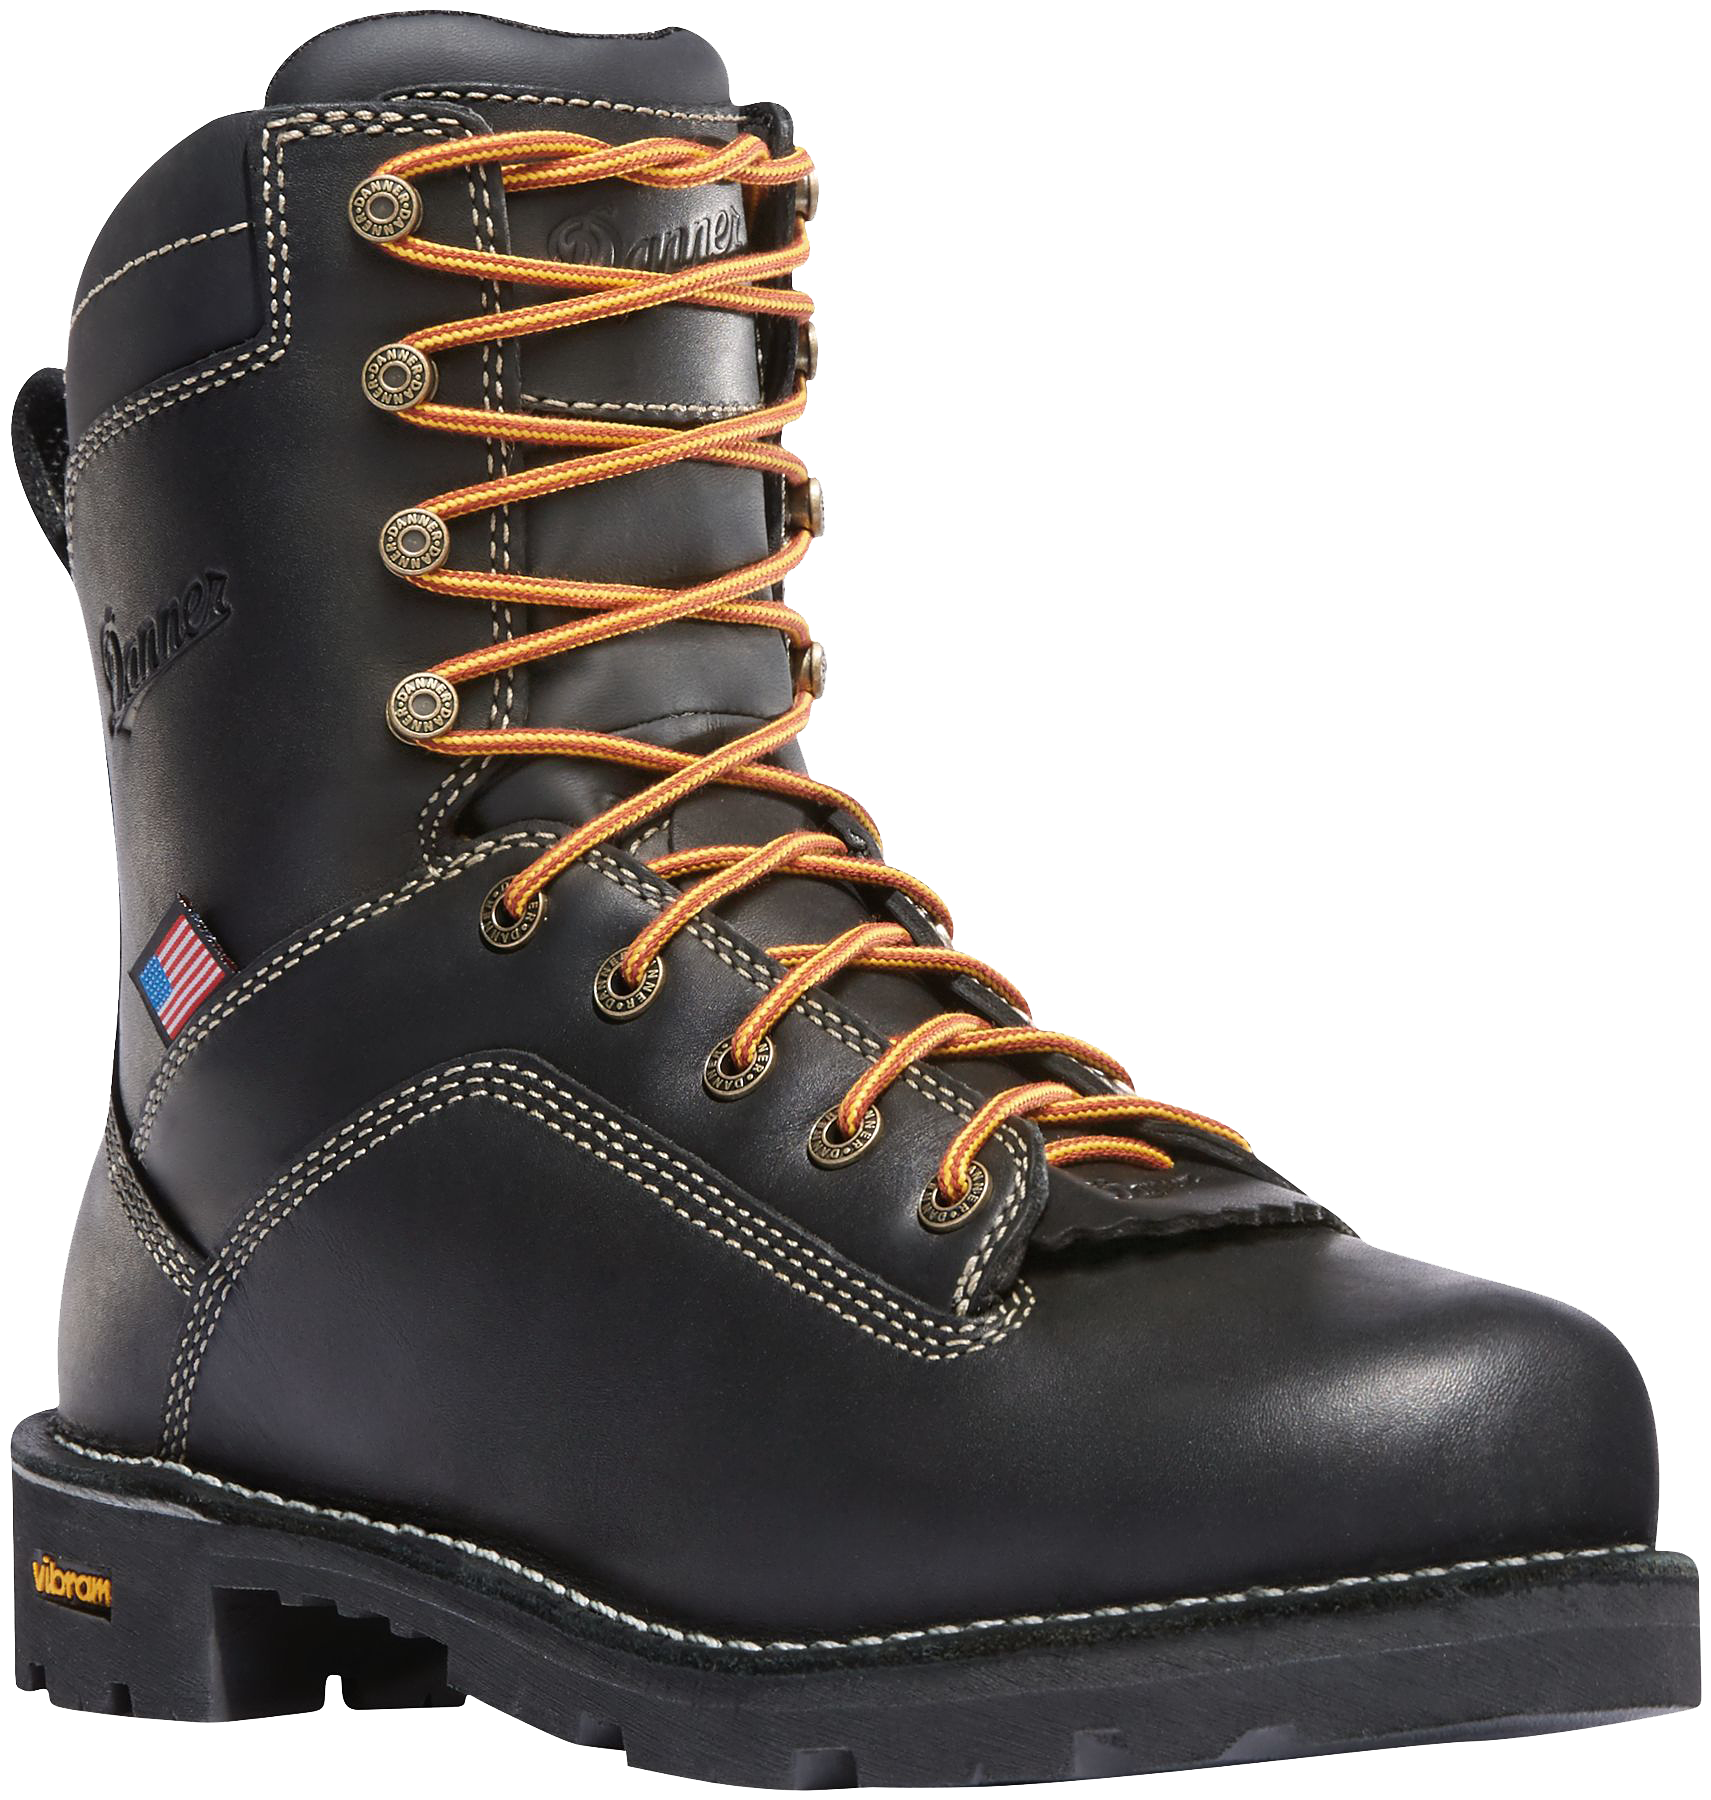 Danner Quarry USA Brown GORE-TEX Alloy Toe Work Boots for Men - Black - 9.5W